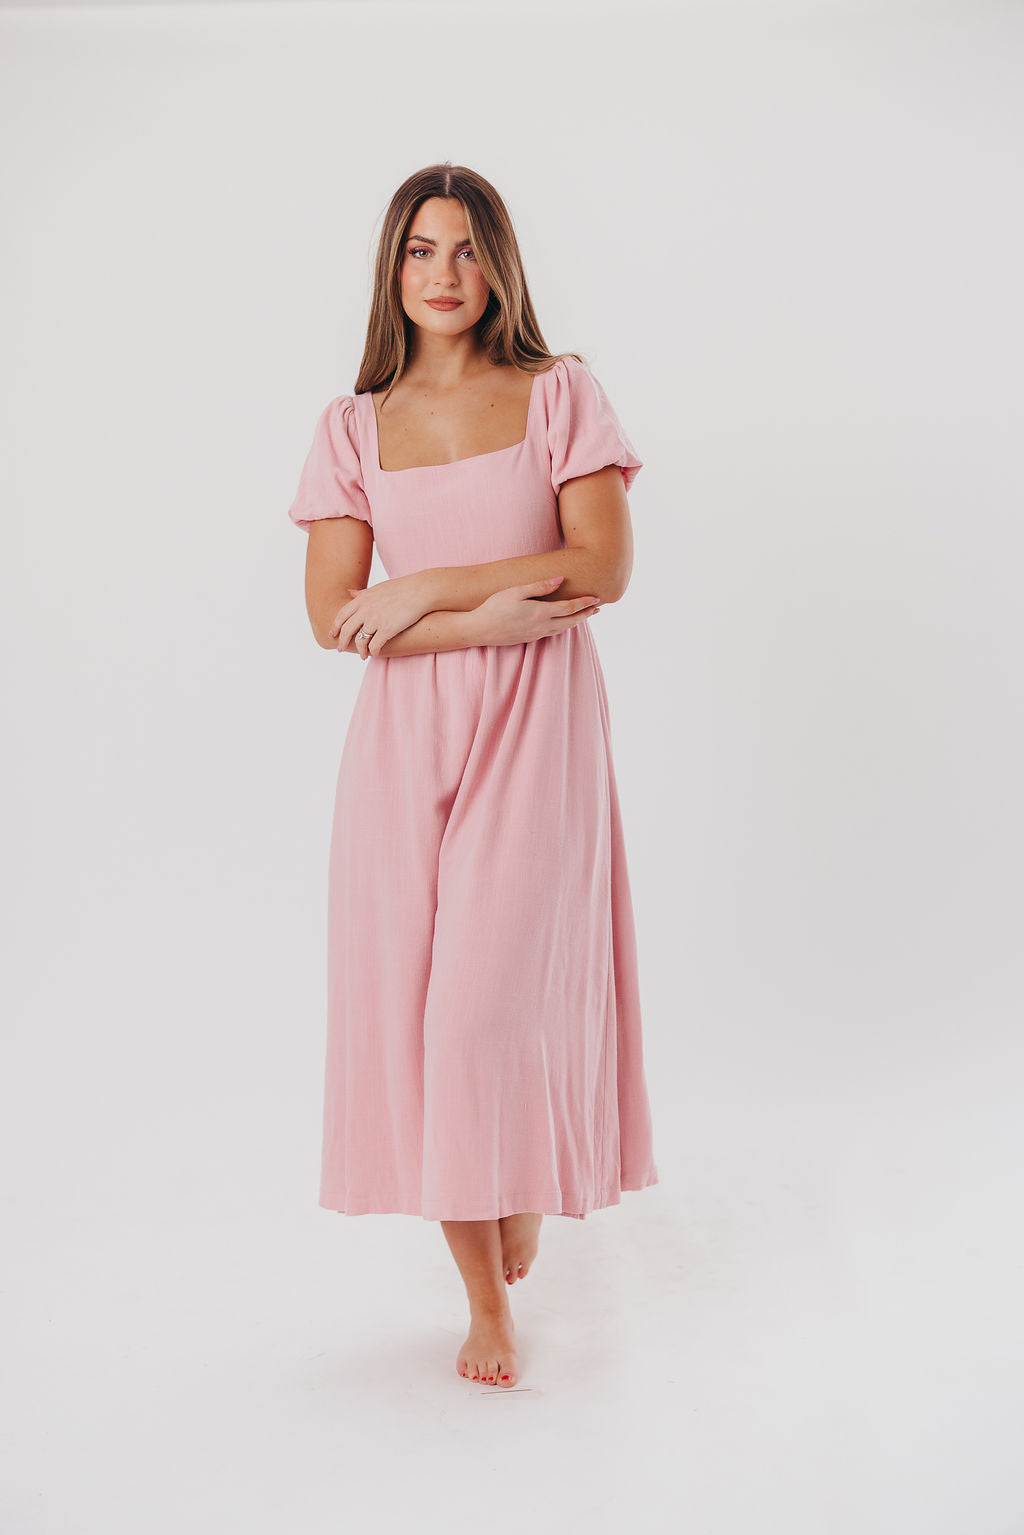 Ainsley Square Neck Midi Dress with Puffed Sleeves in Bright Blush - Bump Friendly & Inclusive Sizing (S-3XL)